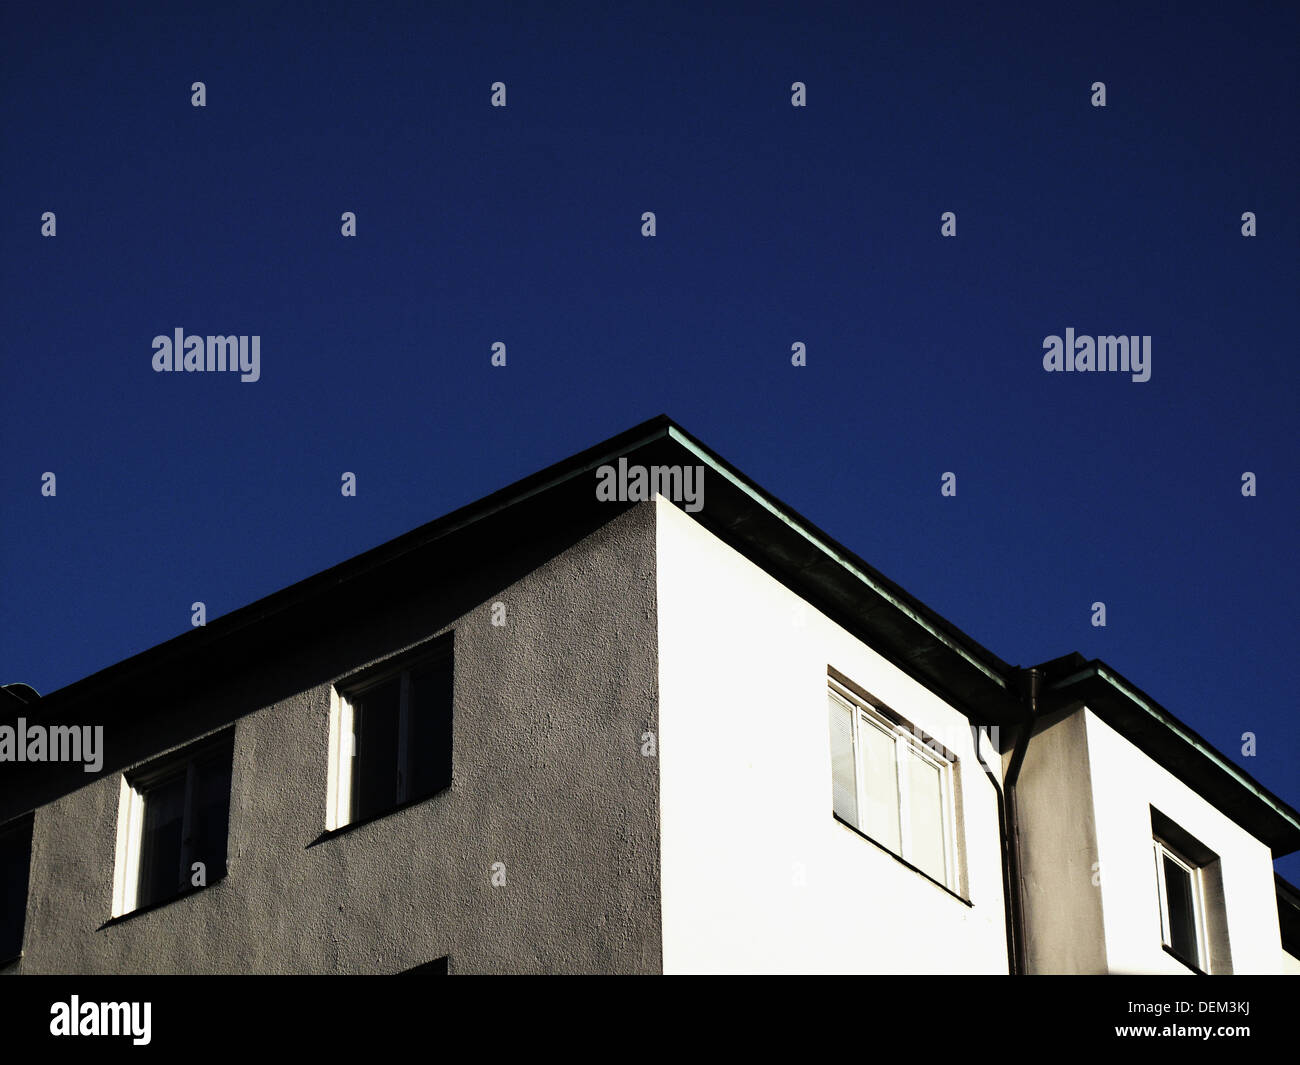 Top Floor of Apartment Building Against Blue Sky, Low Angle View Stock Photo